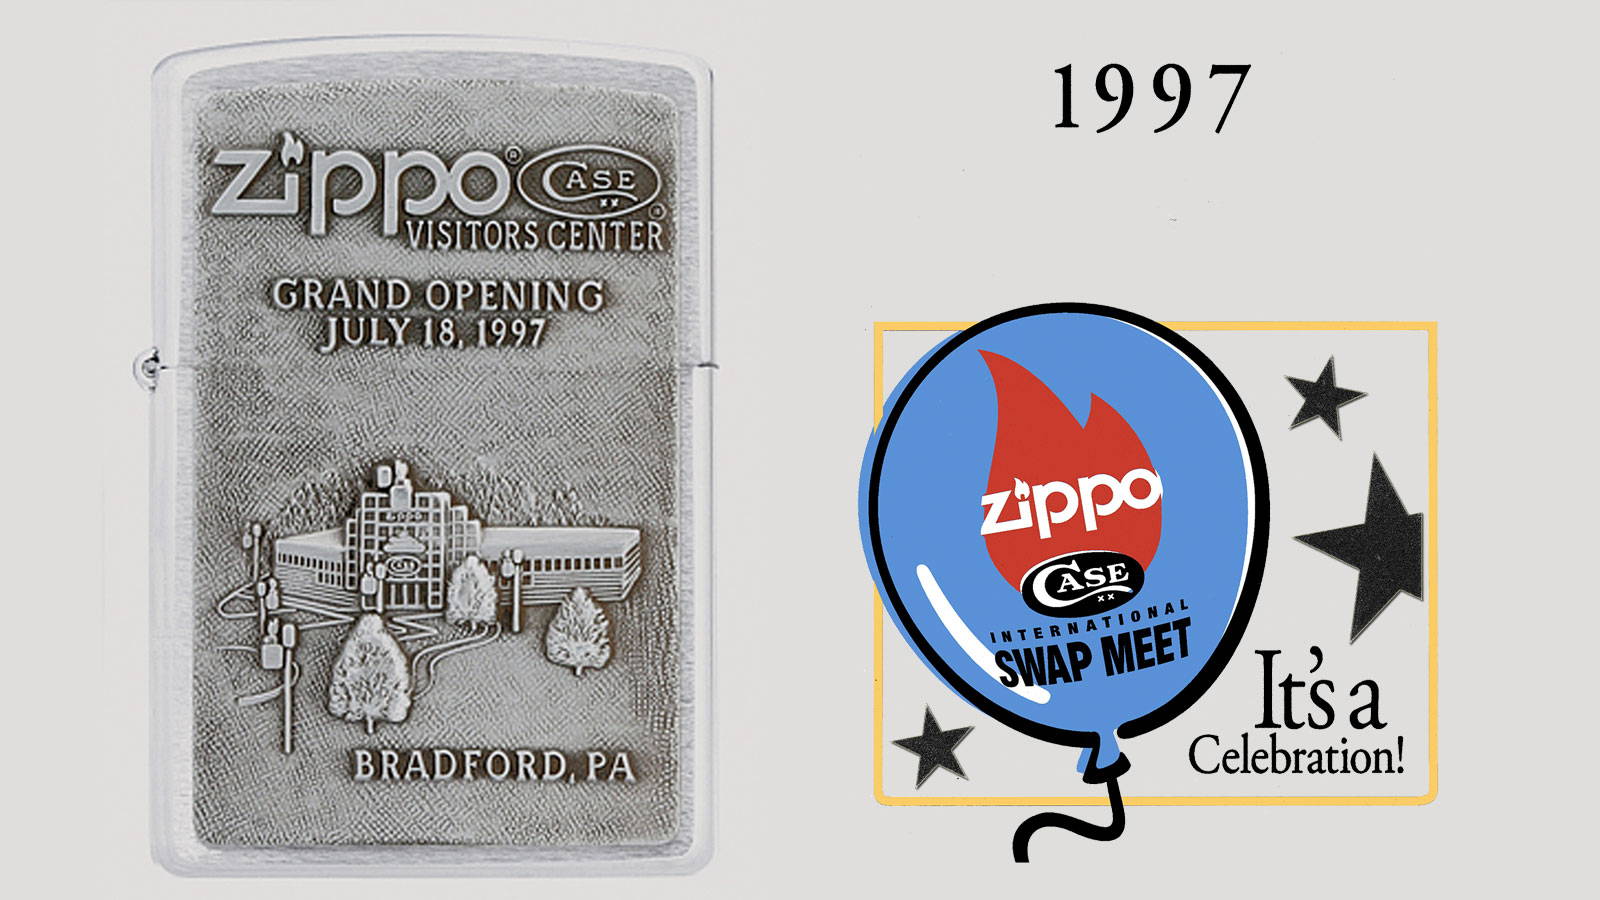 Image of the Grand Opening Commemorative Lighter.